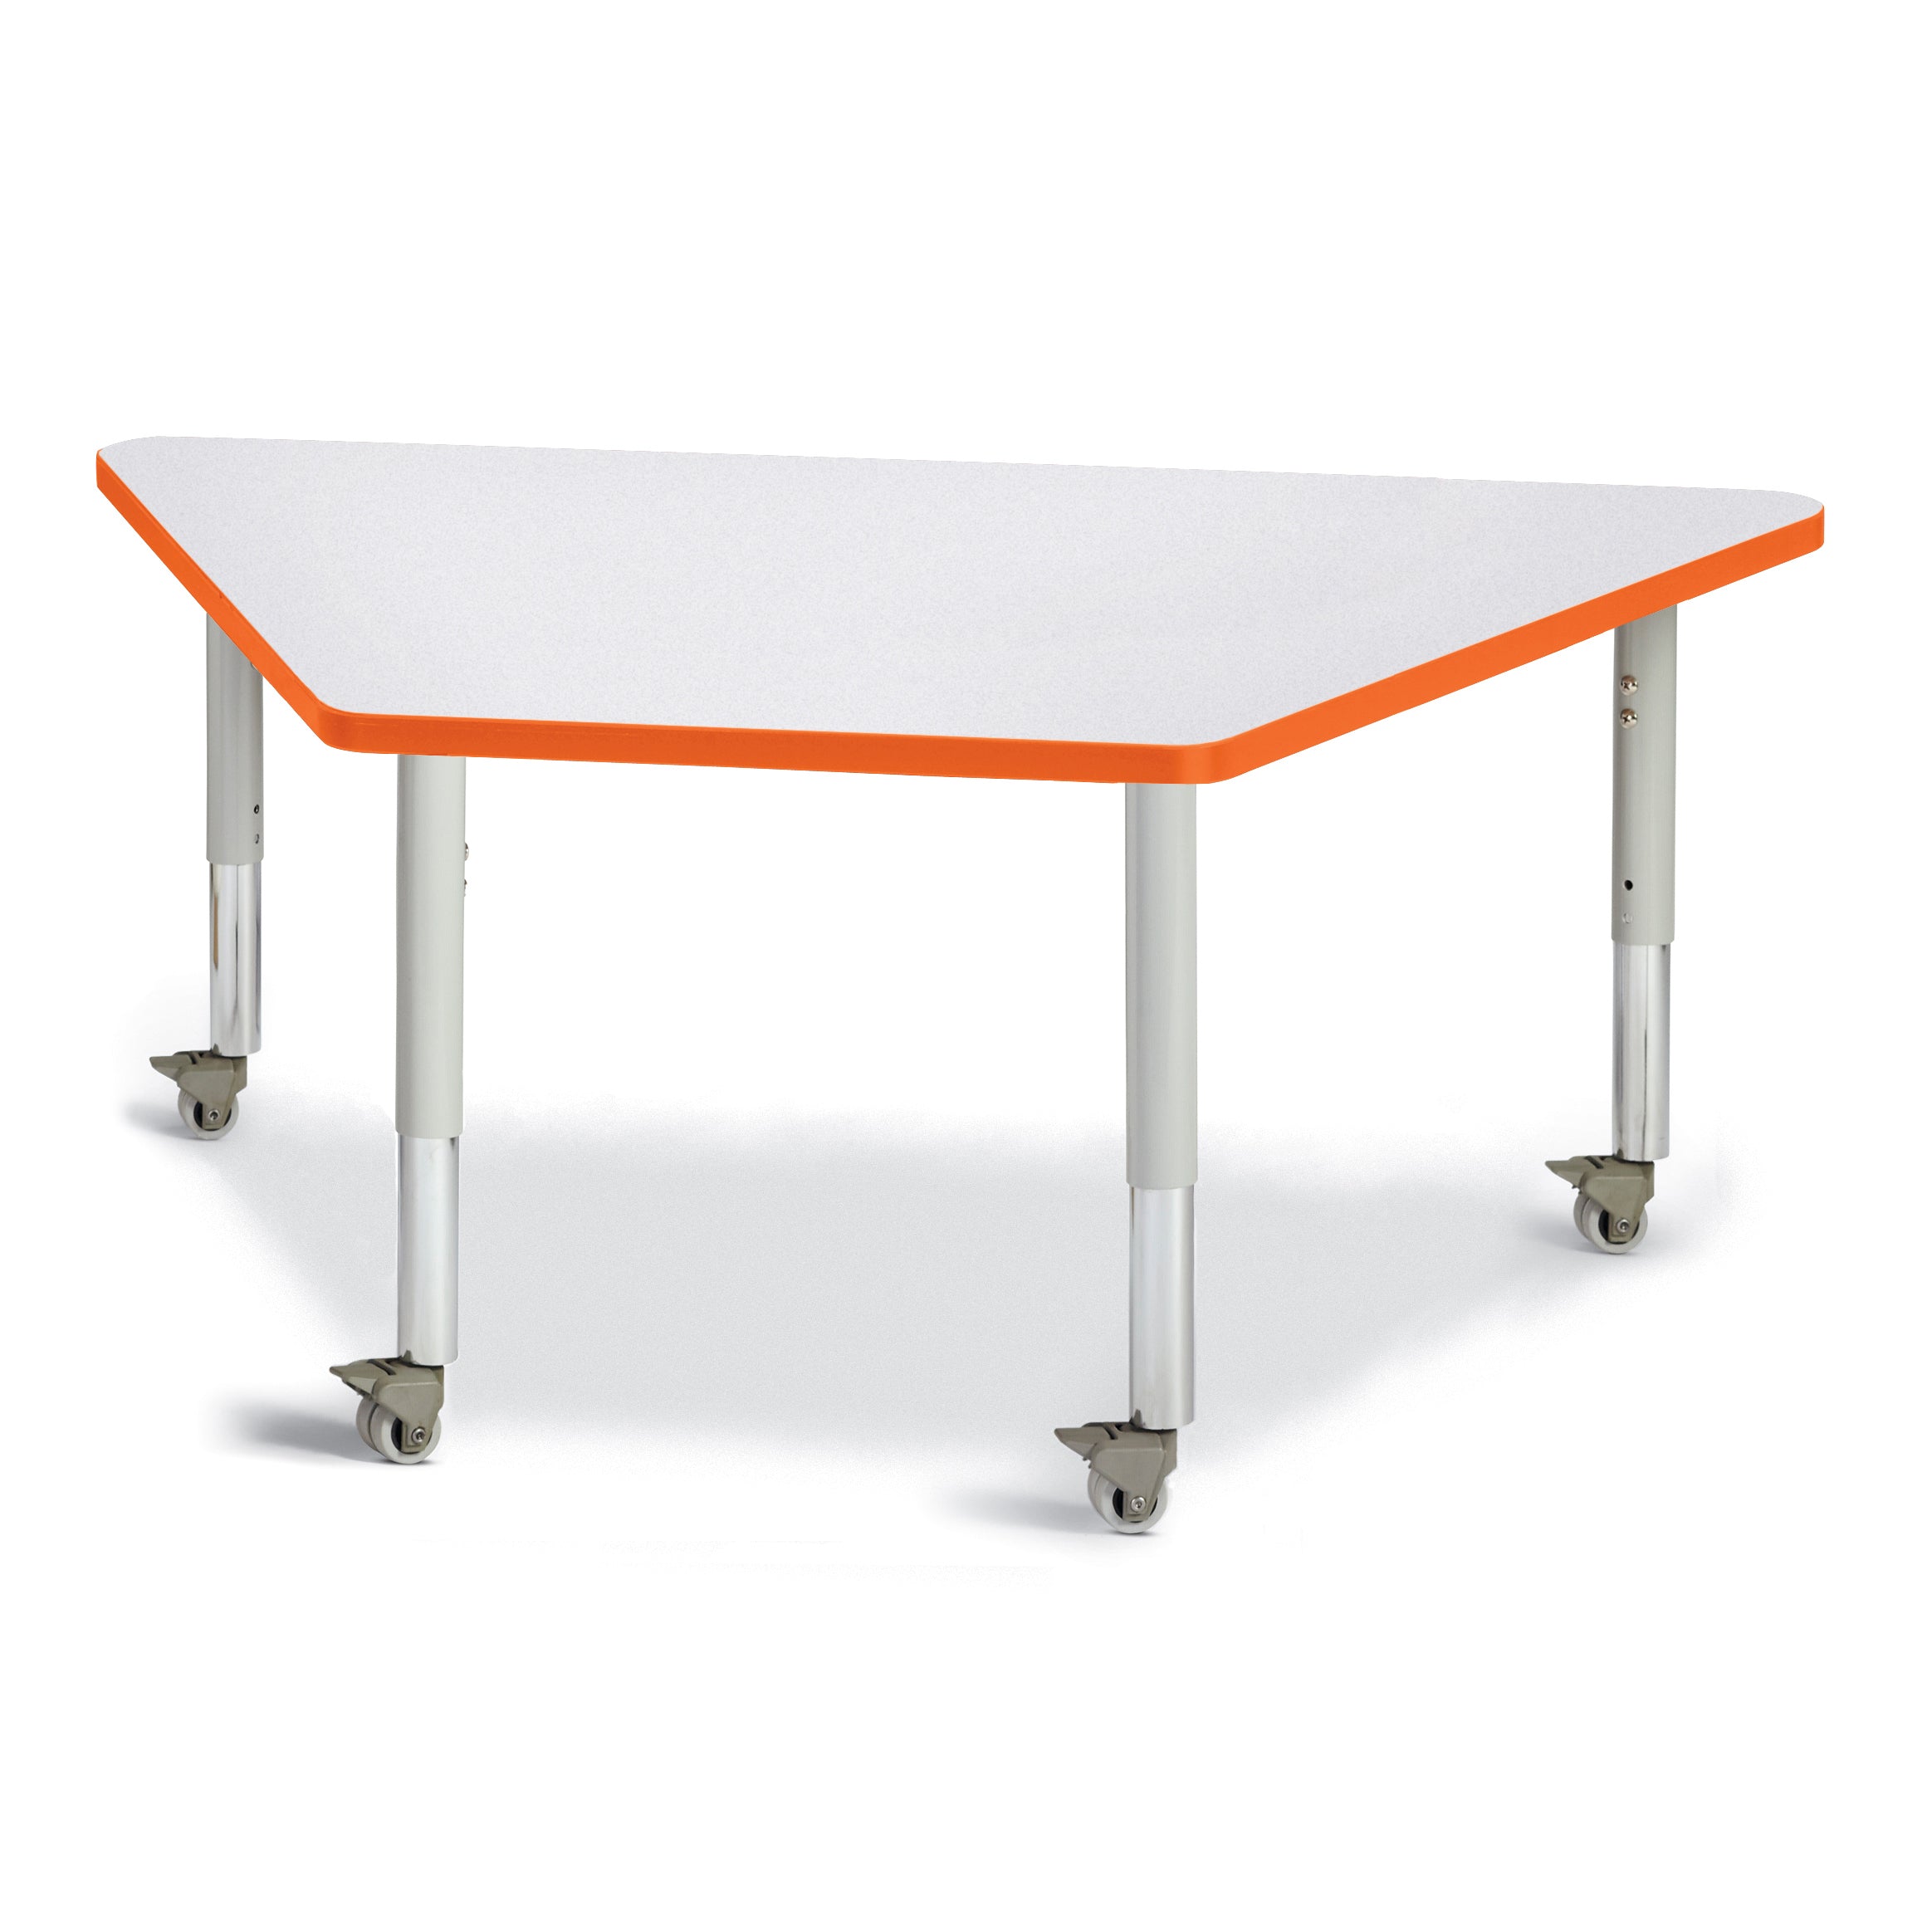 6443JCM114, Berries Trapezoid Activity Tables - 30" X 60", Mobile - Freckled Gray/Orange/Gray